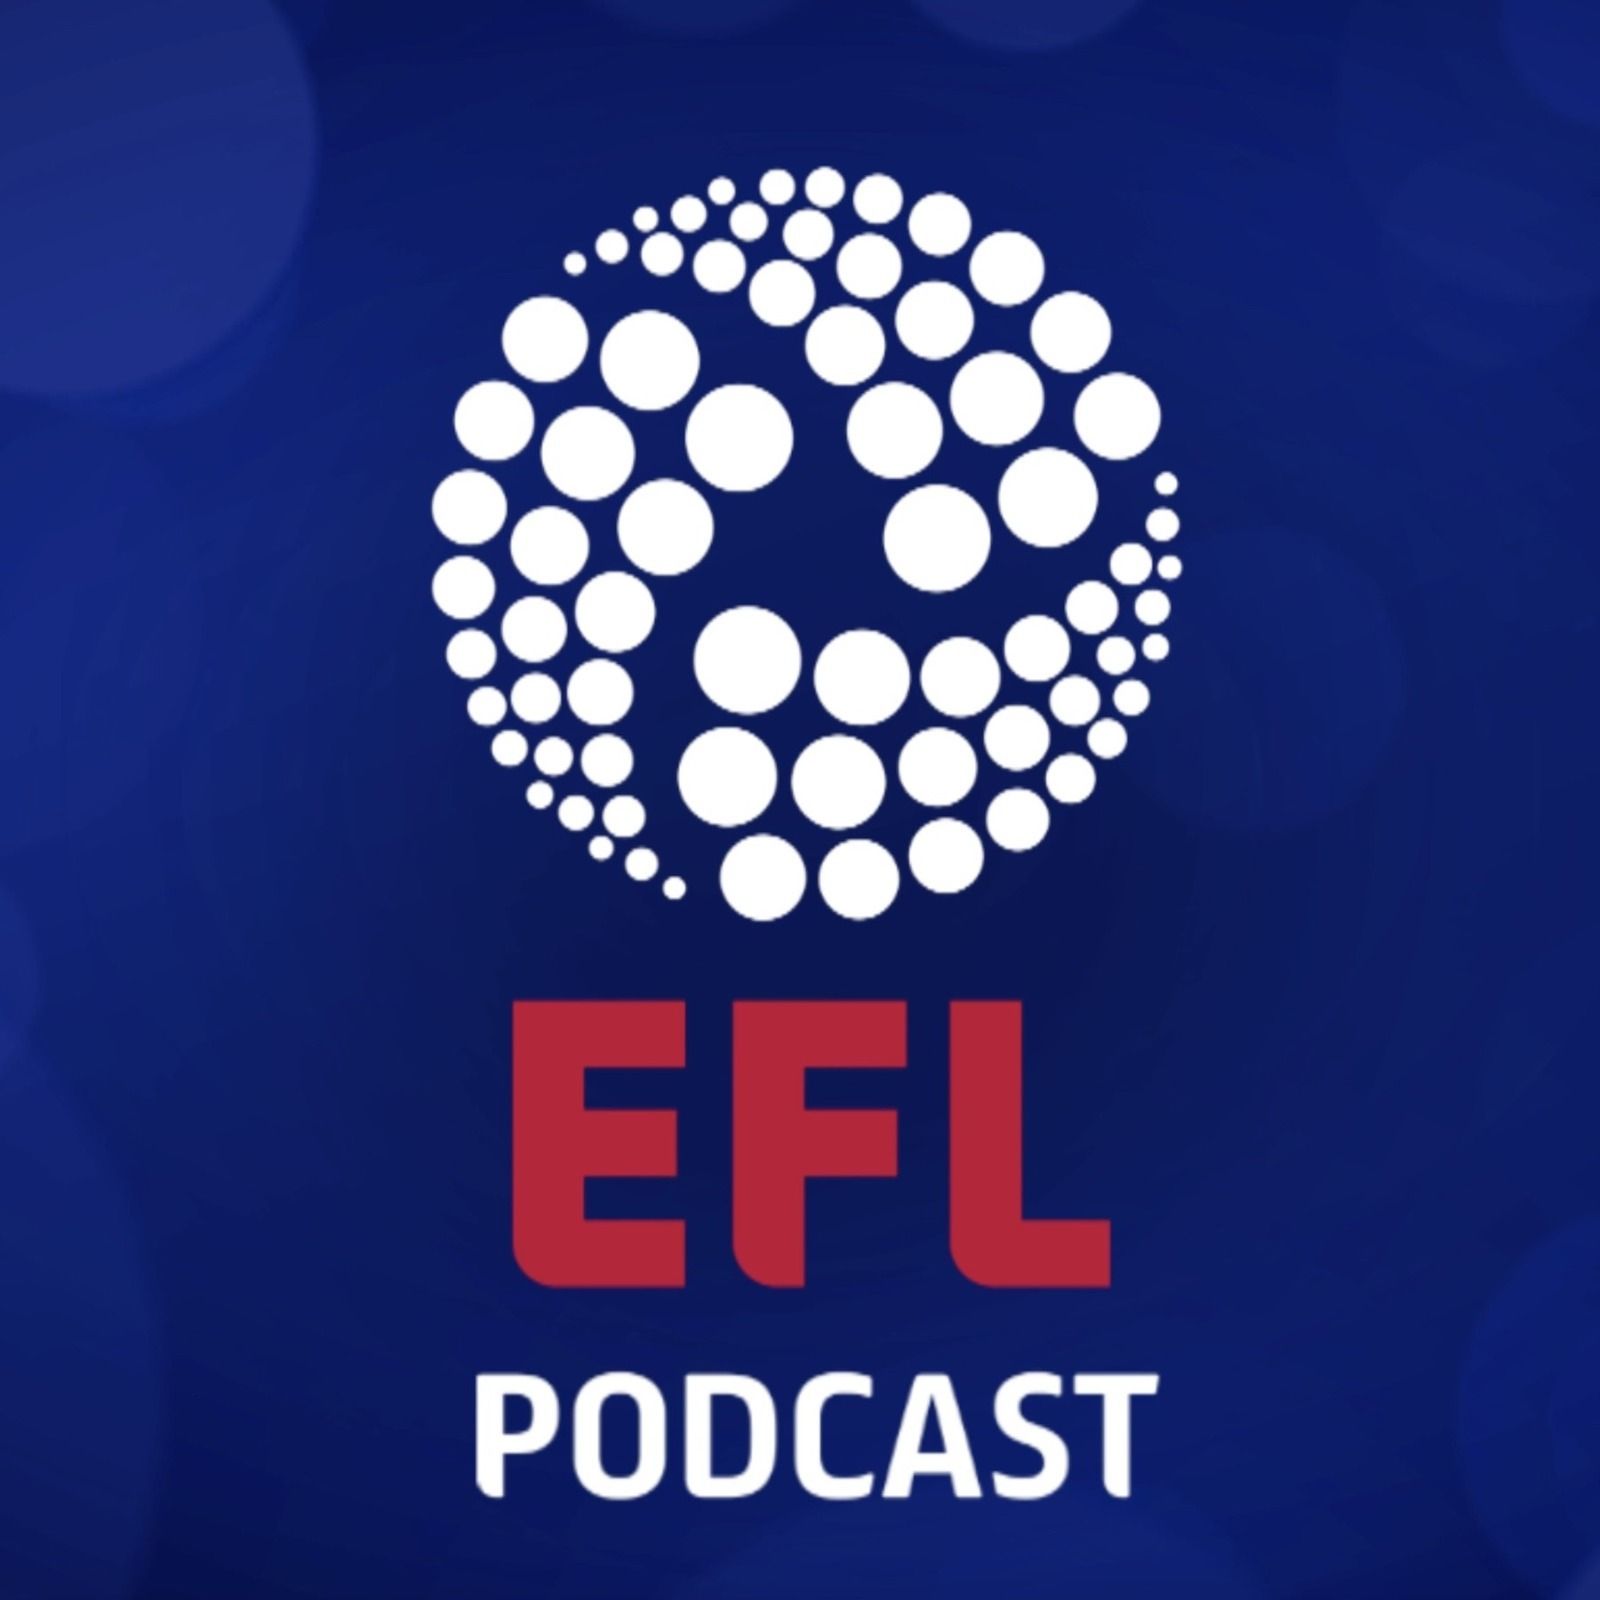 S3 Ep19: Tears of joy for Crawley’s Nick Tsaroulla, Reading’s Michael Morrison on their rollercoaster season, and a first interview for the EFL’s new chief executive Trevor Birch.